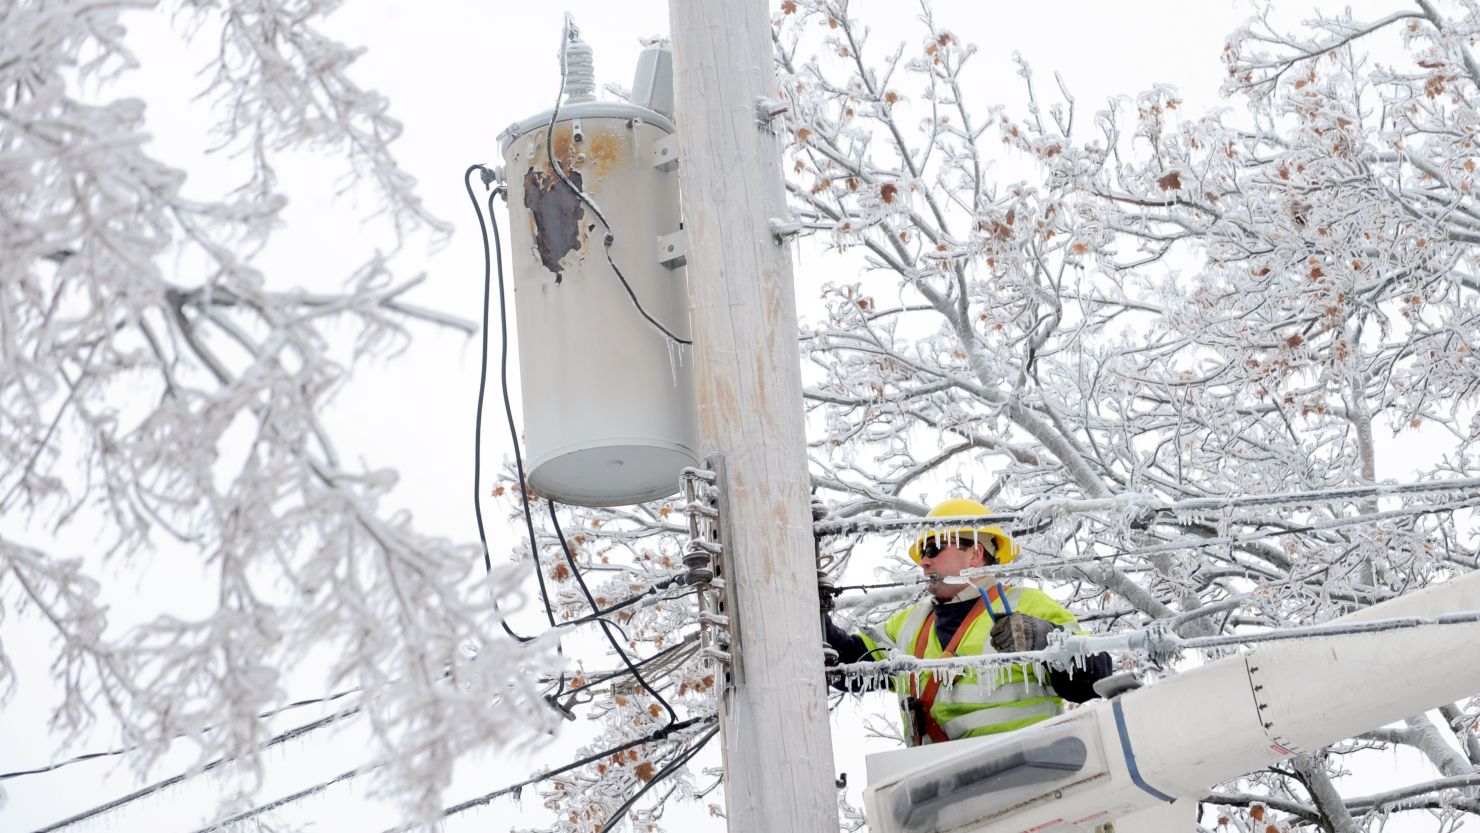 Dave Dora, with Grand Haven Board of Light and Power, works on fallen wires in Lansing, Michigan. on December 23, 2013.  